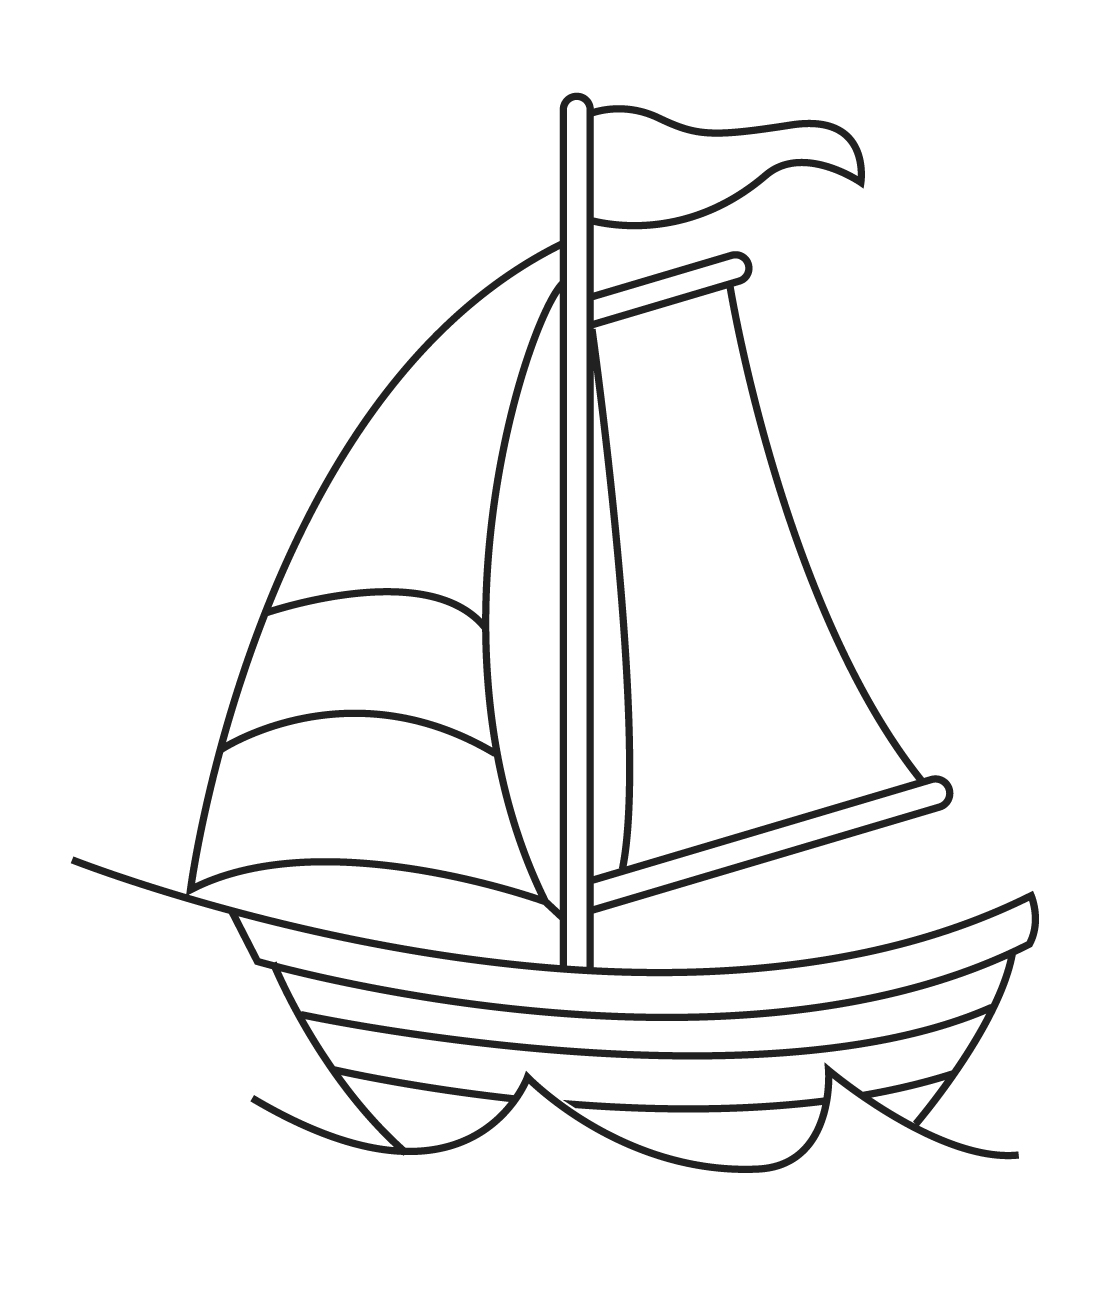 Simple Ship Drawing - Cliparts.co